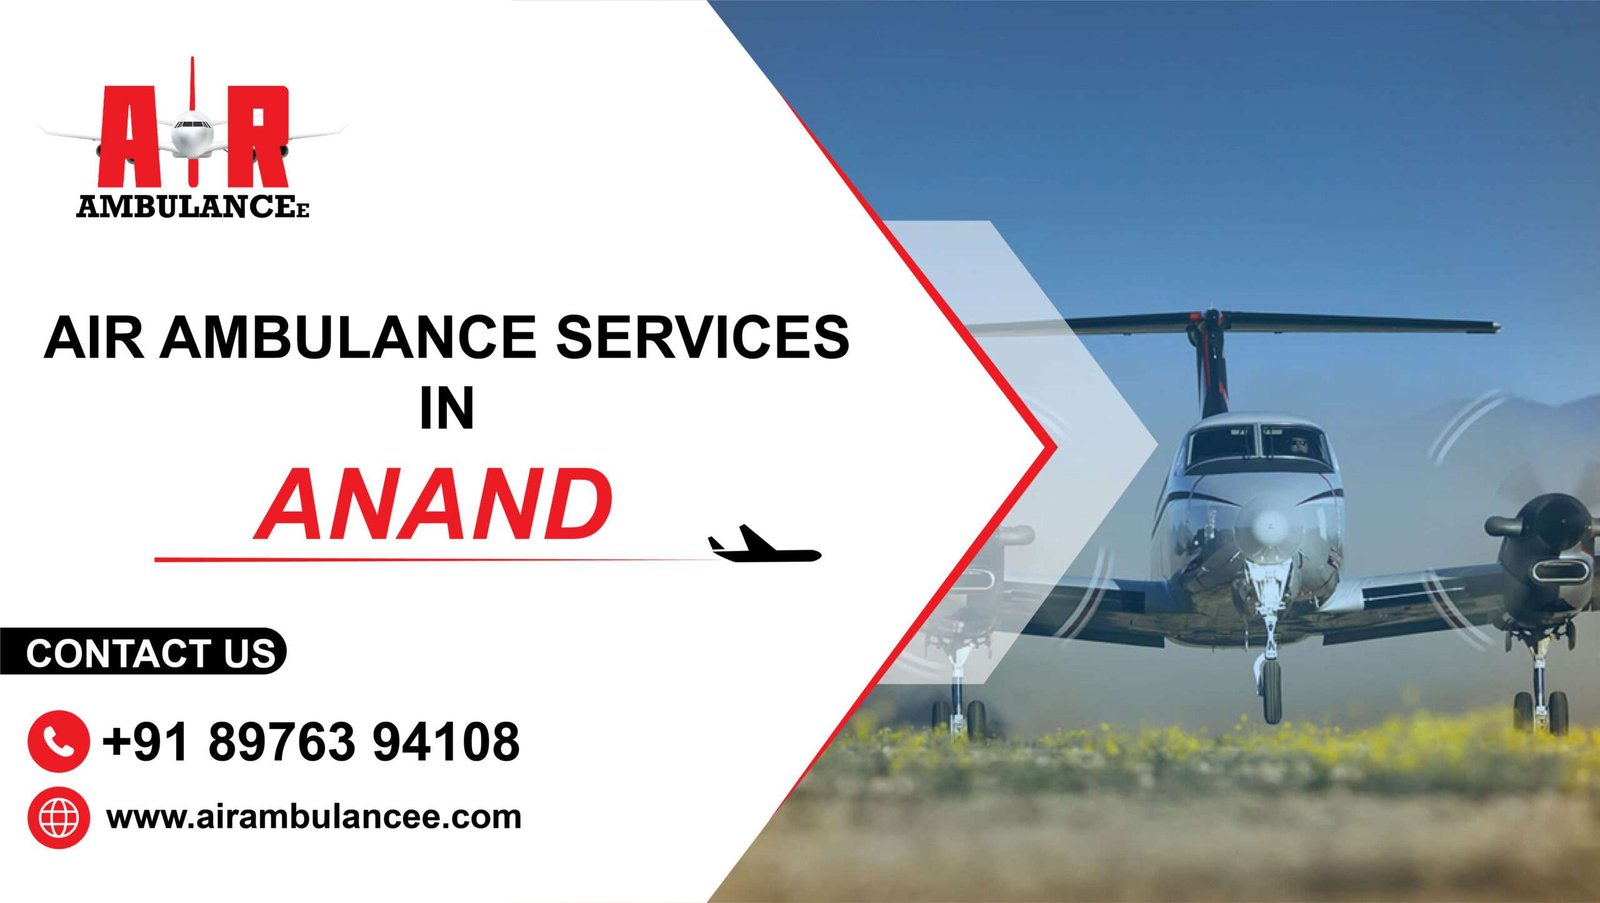 Air Ambulance Services In Anand